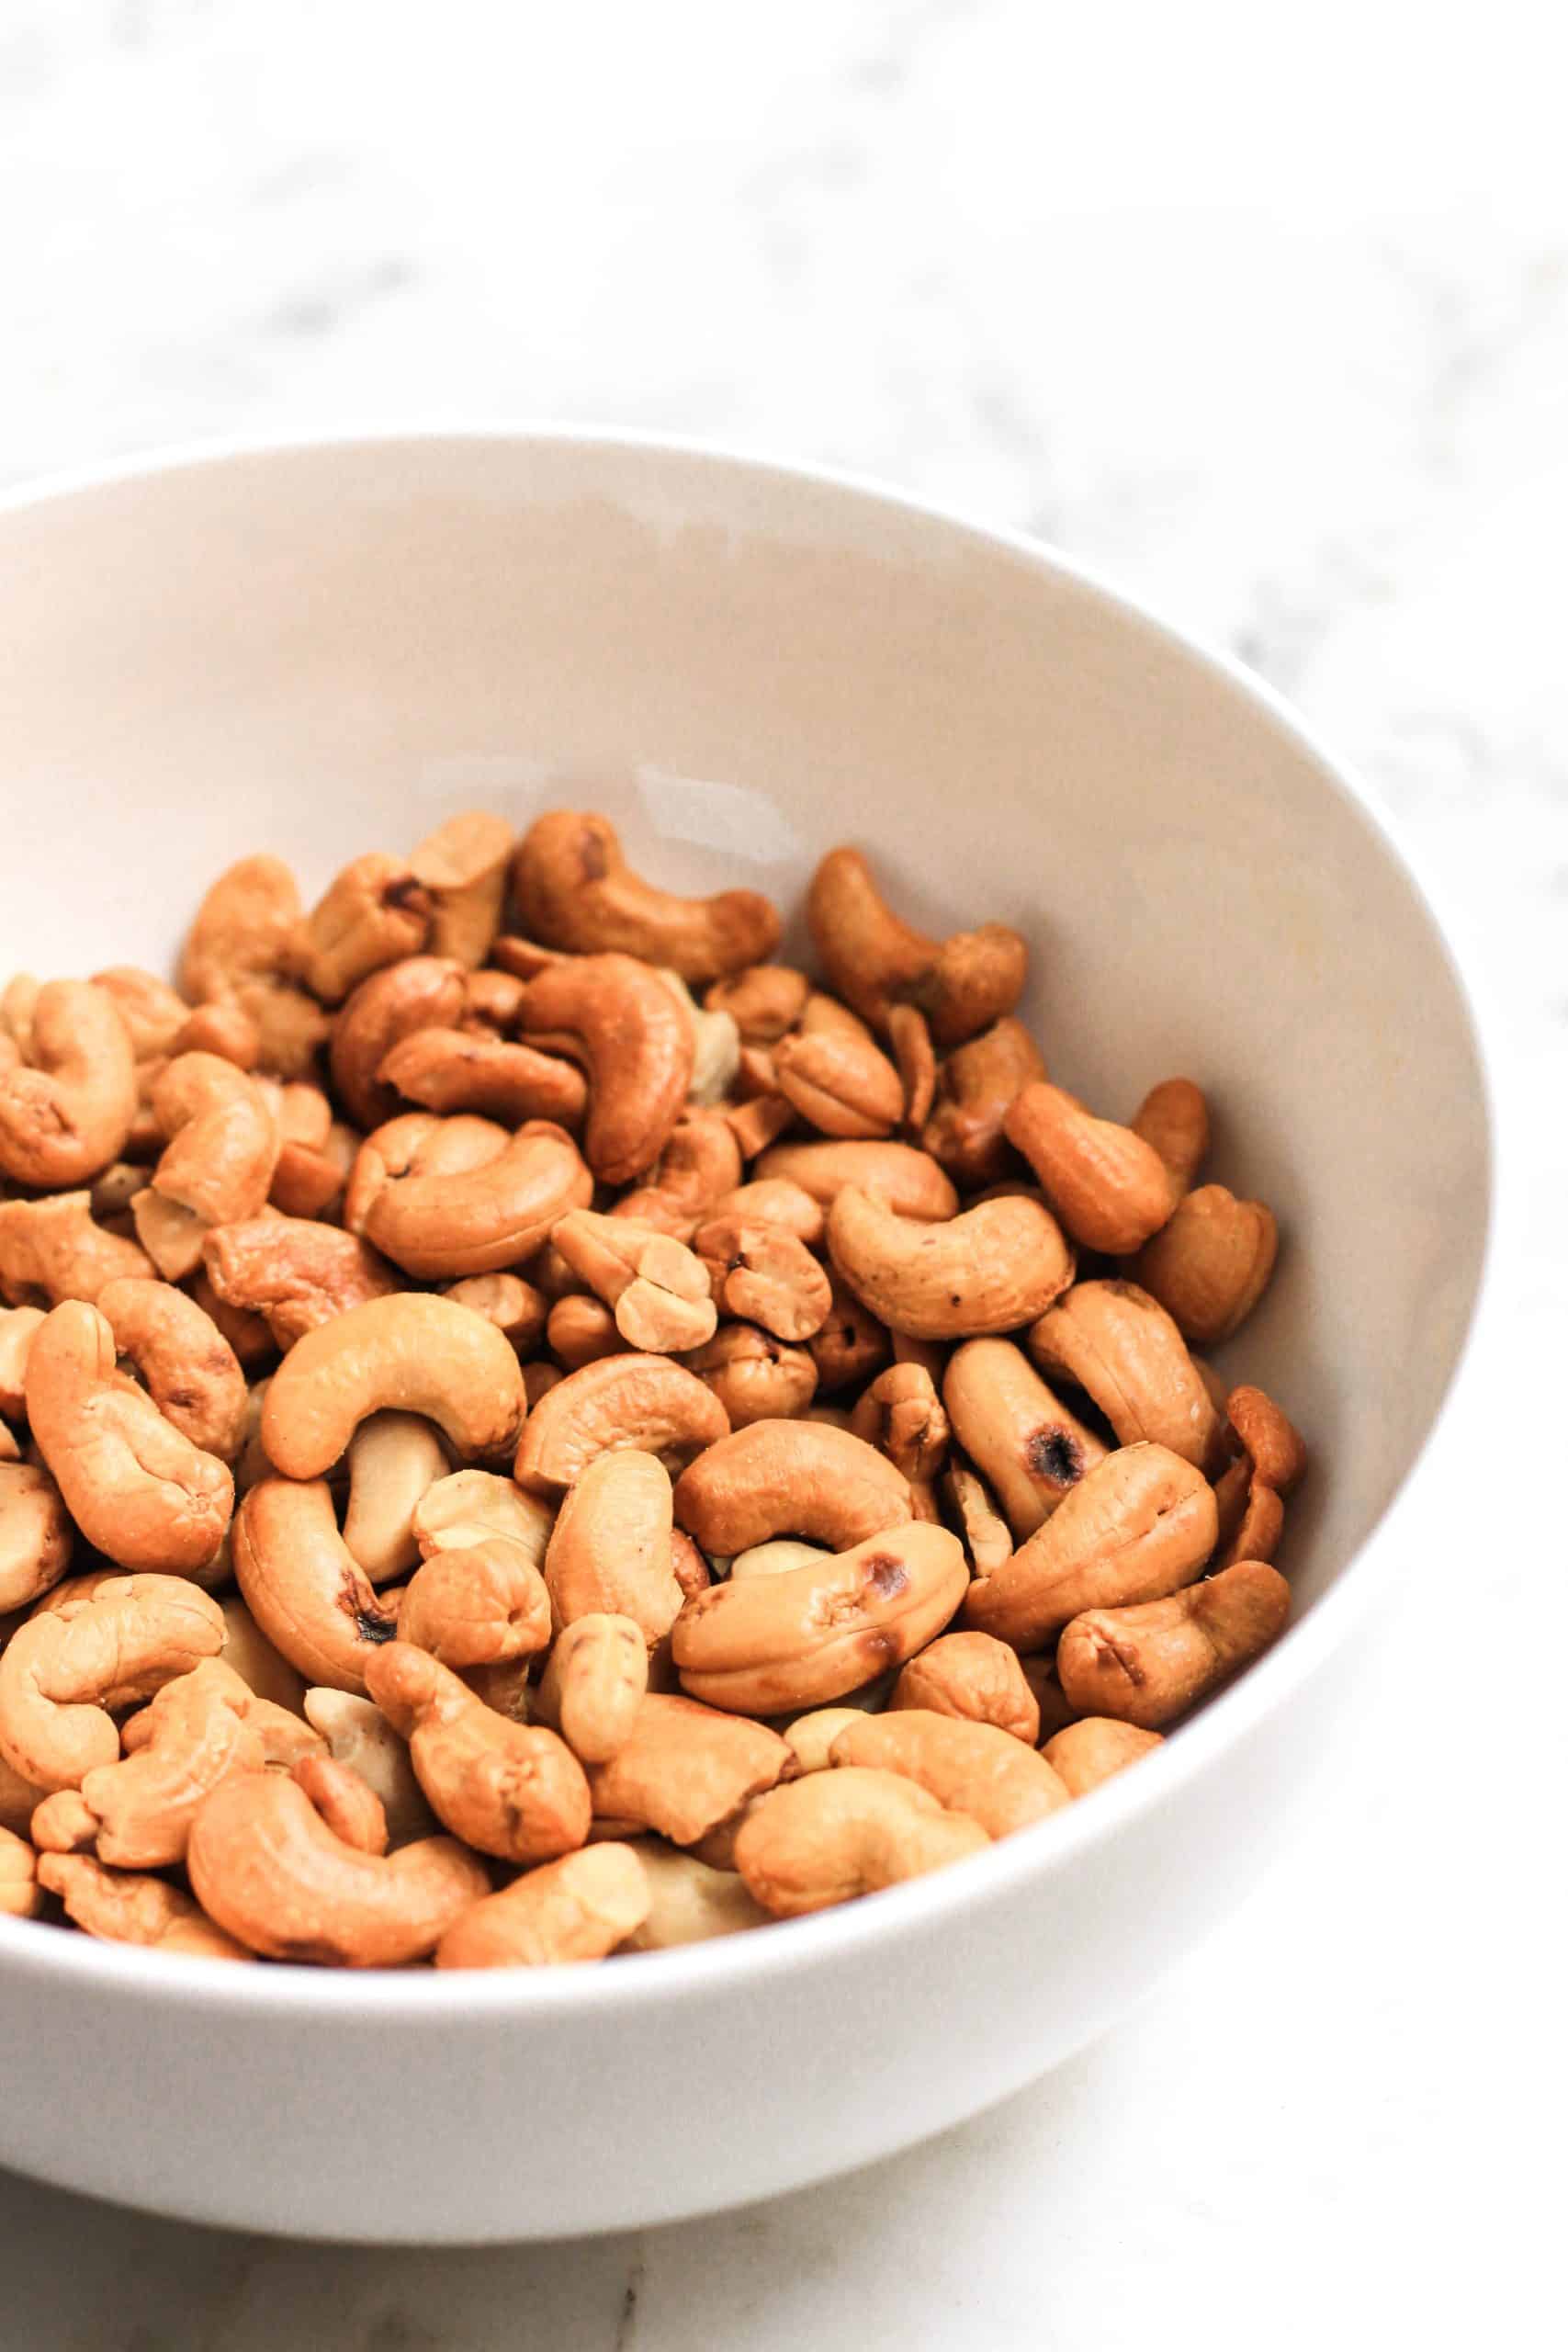 A big bowl of roasted cashew nuts.